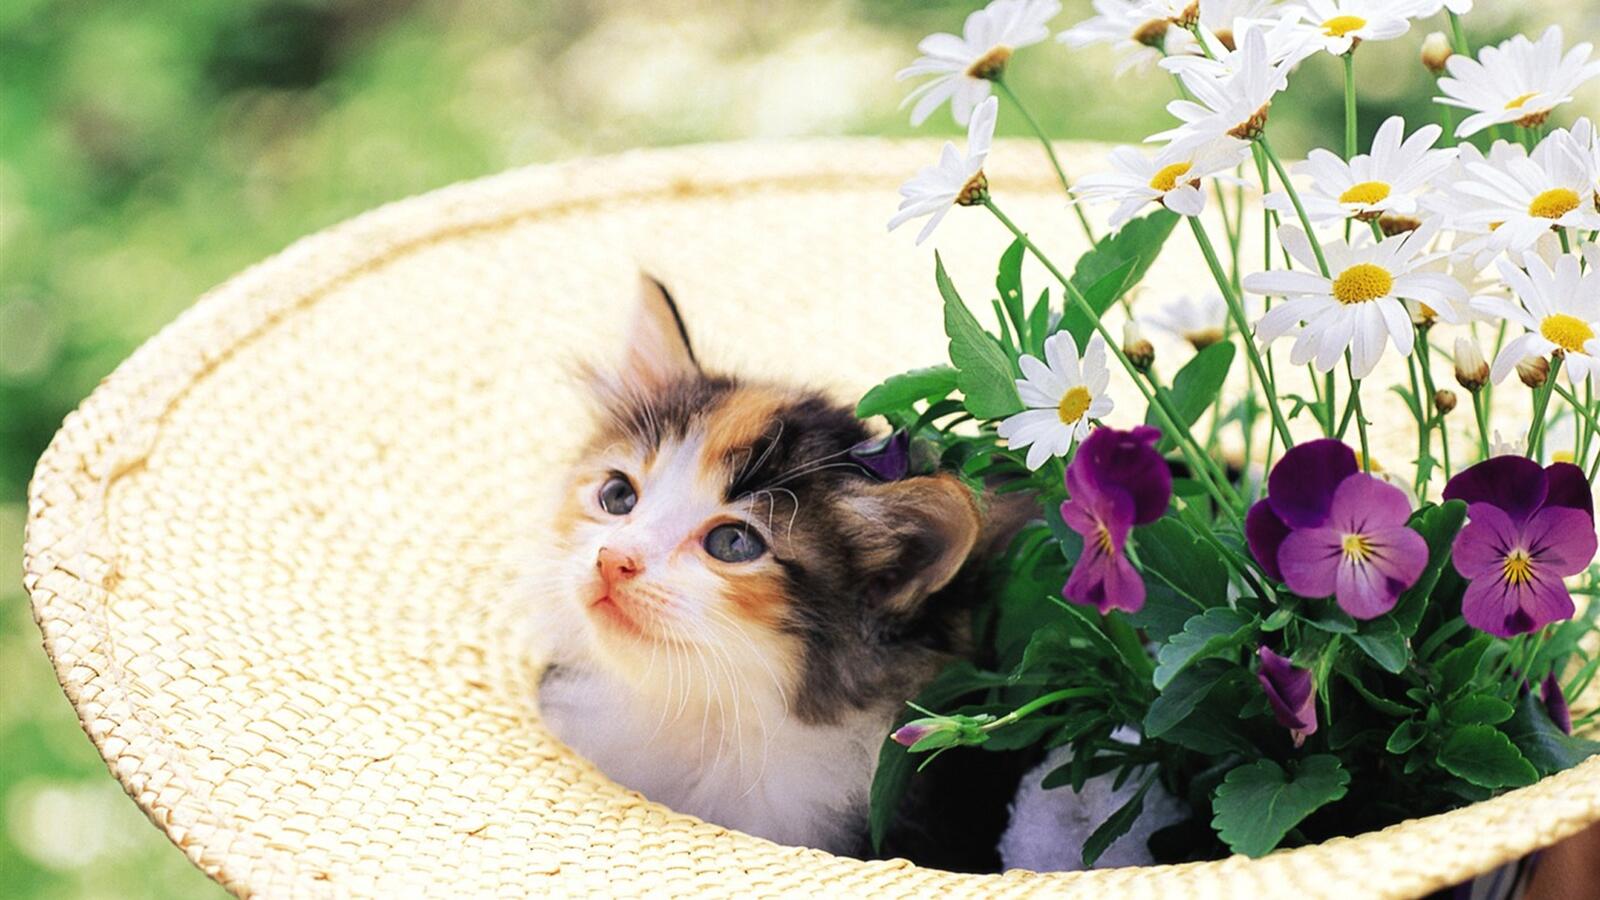 Free photo A little kitten sits in a white hat